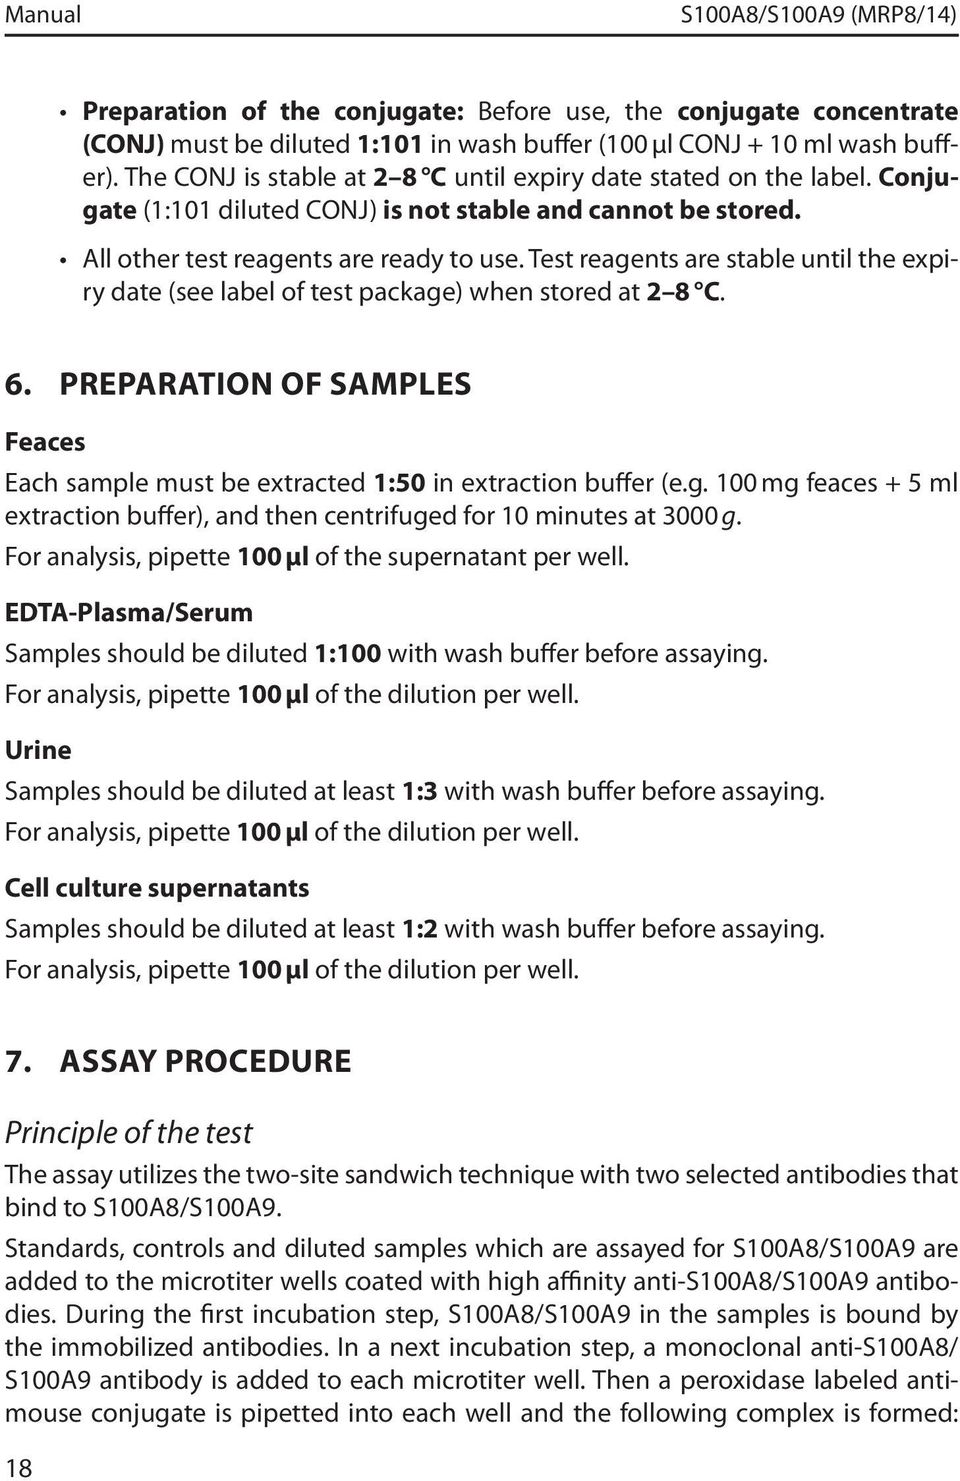 Test reagents are stable until the expiry date (see label of test package) when stored at 2 8 C. 6. preparation of samples Feaces Each sample must be extracted 1:50 in extraction buffer (e.g. 100 mg feaces + 5 ml extraction buffer), and then centrifuged for 10 minutes at 3000 g.